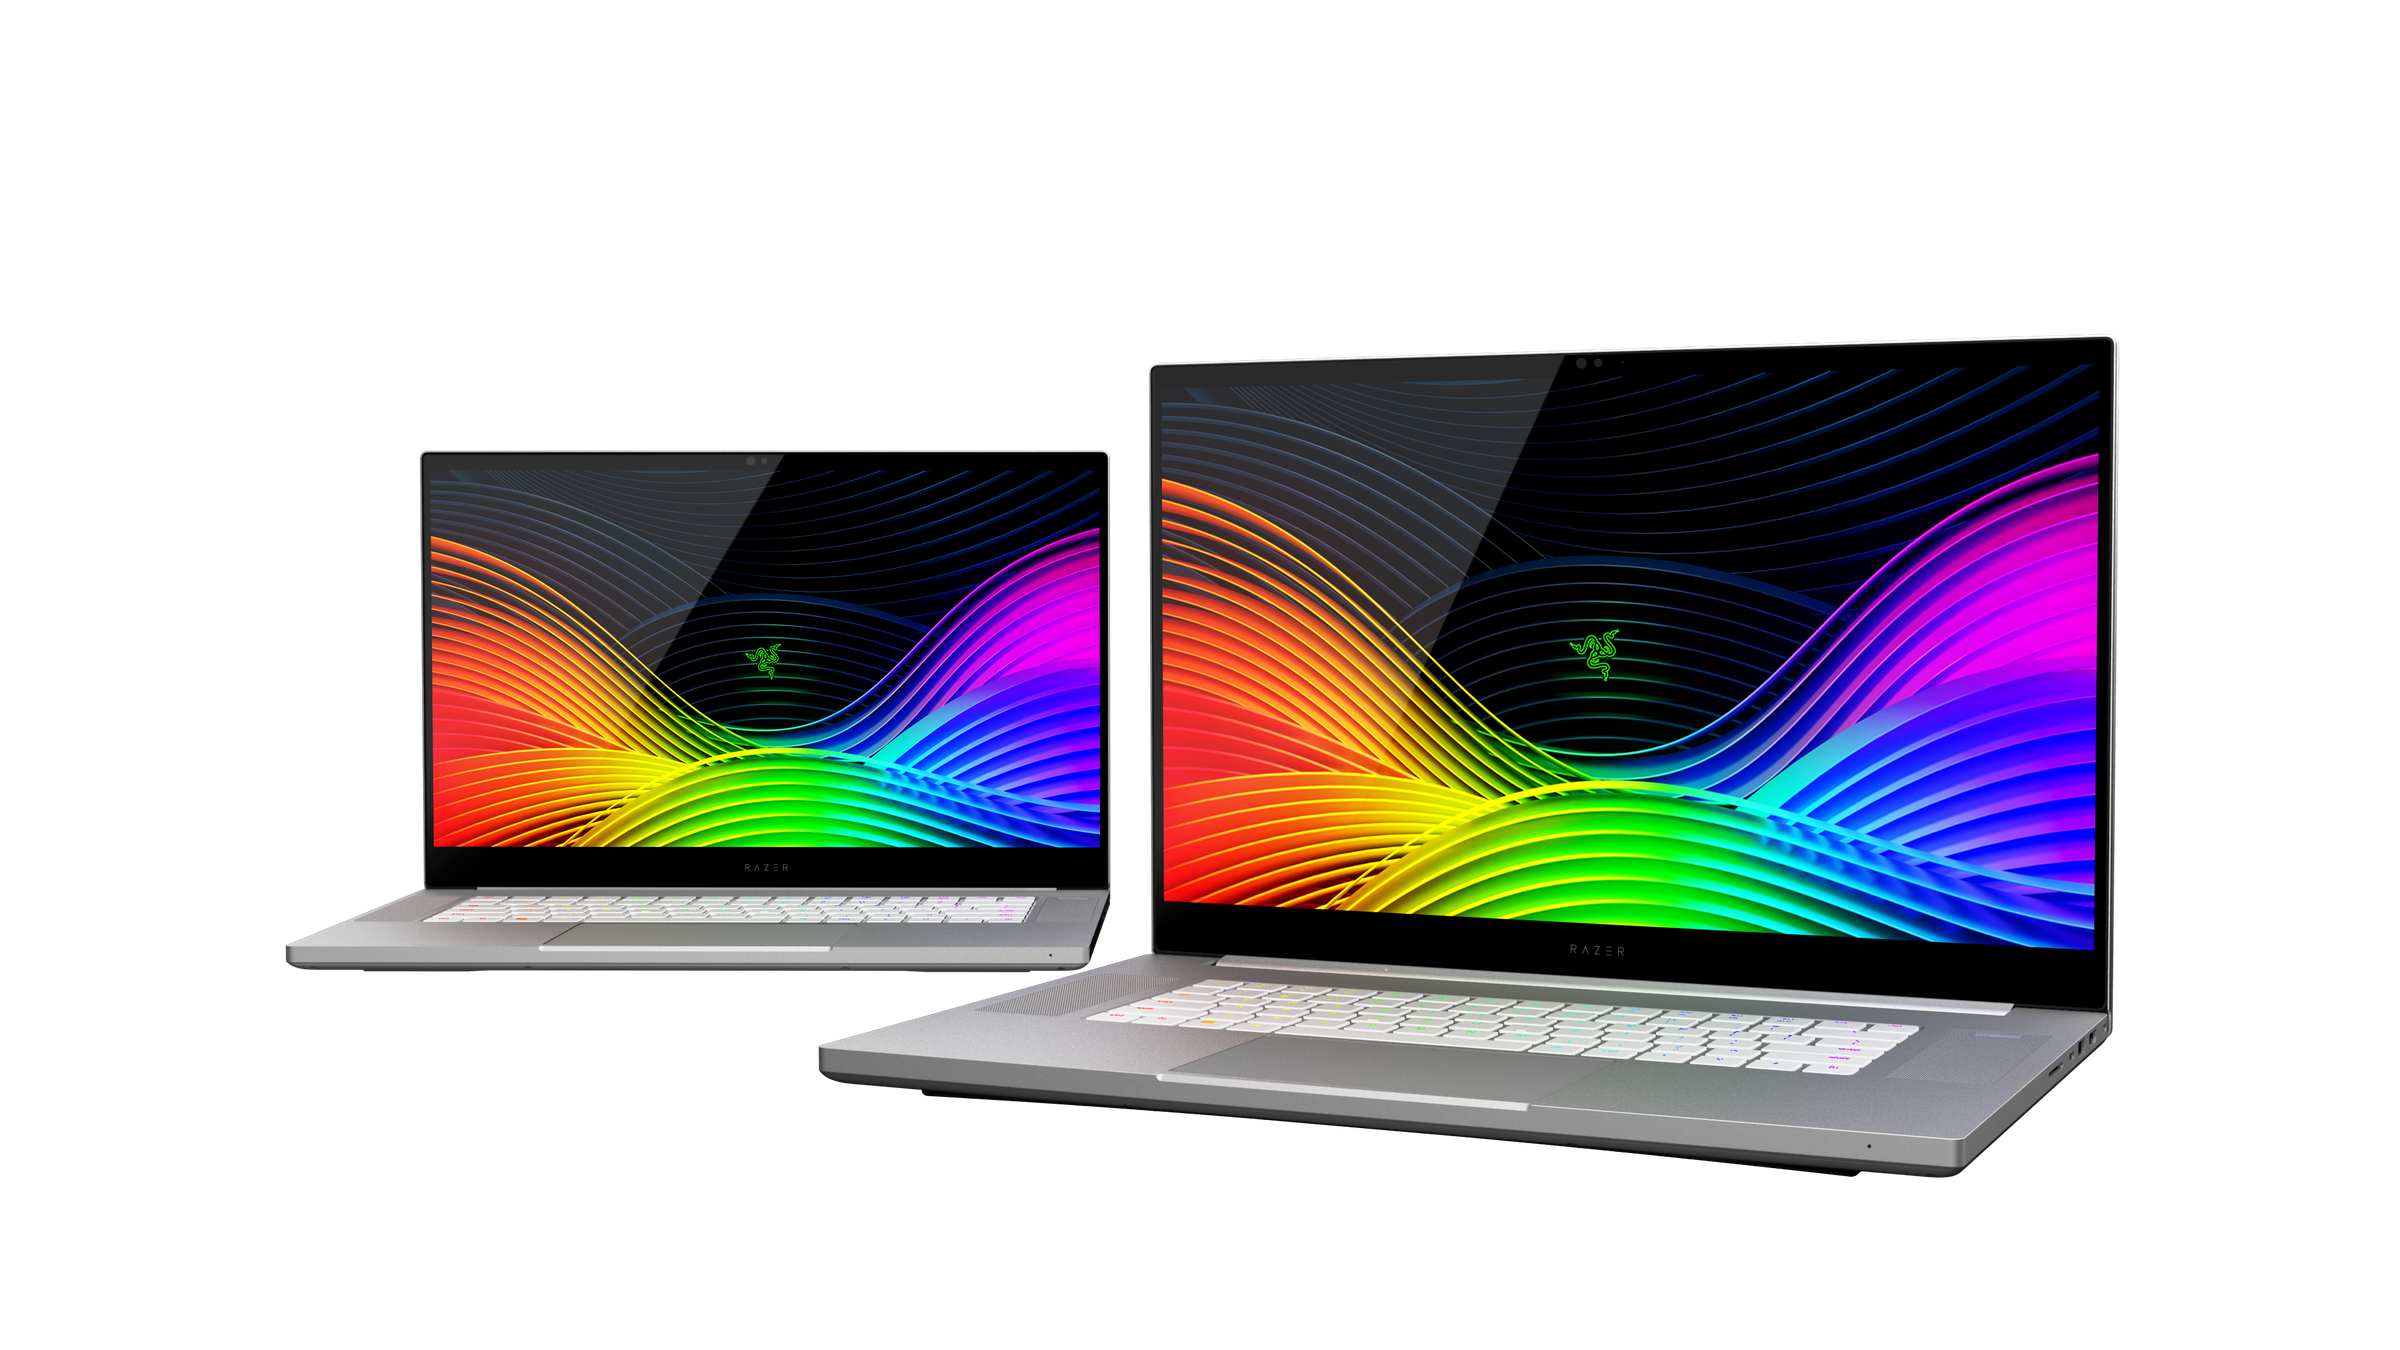 The larger Razer Blade 17 Studio Edition can be configured with a 4K 120Hz display.